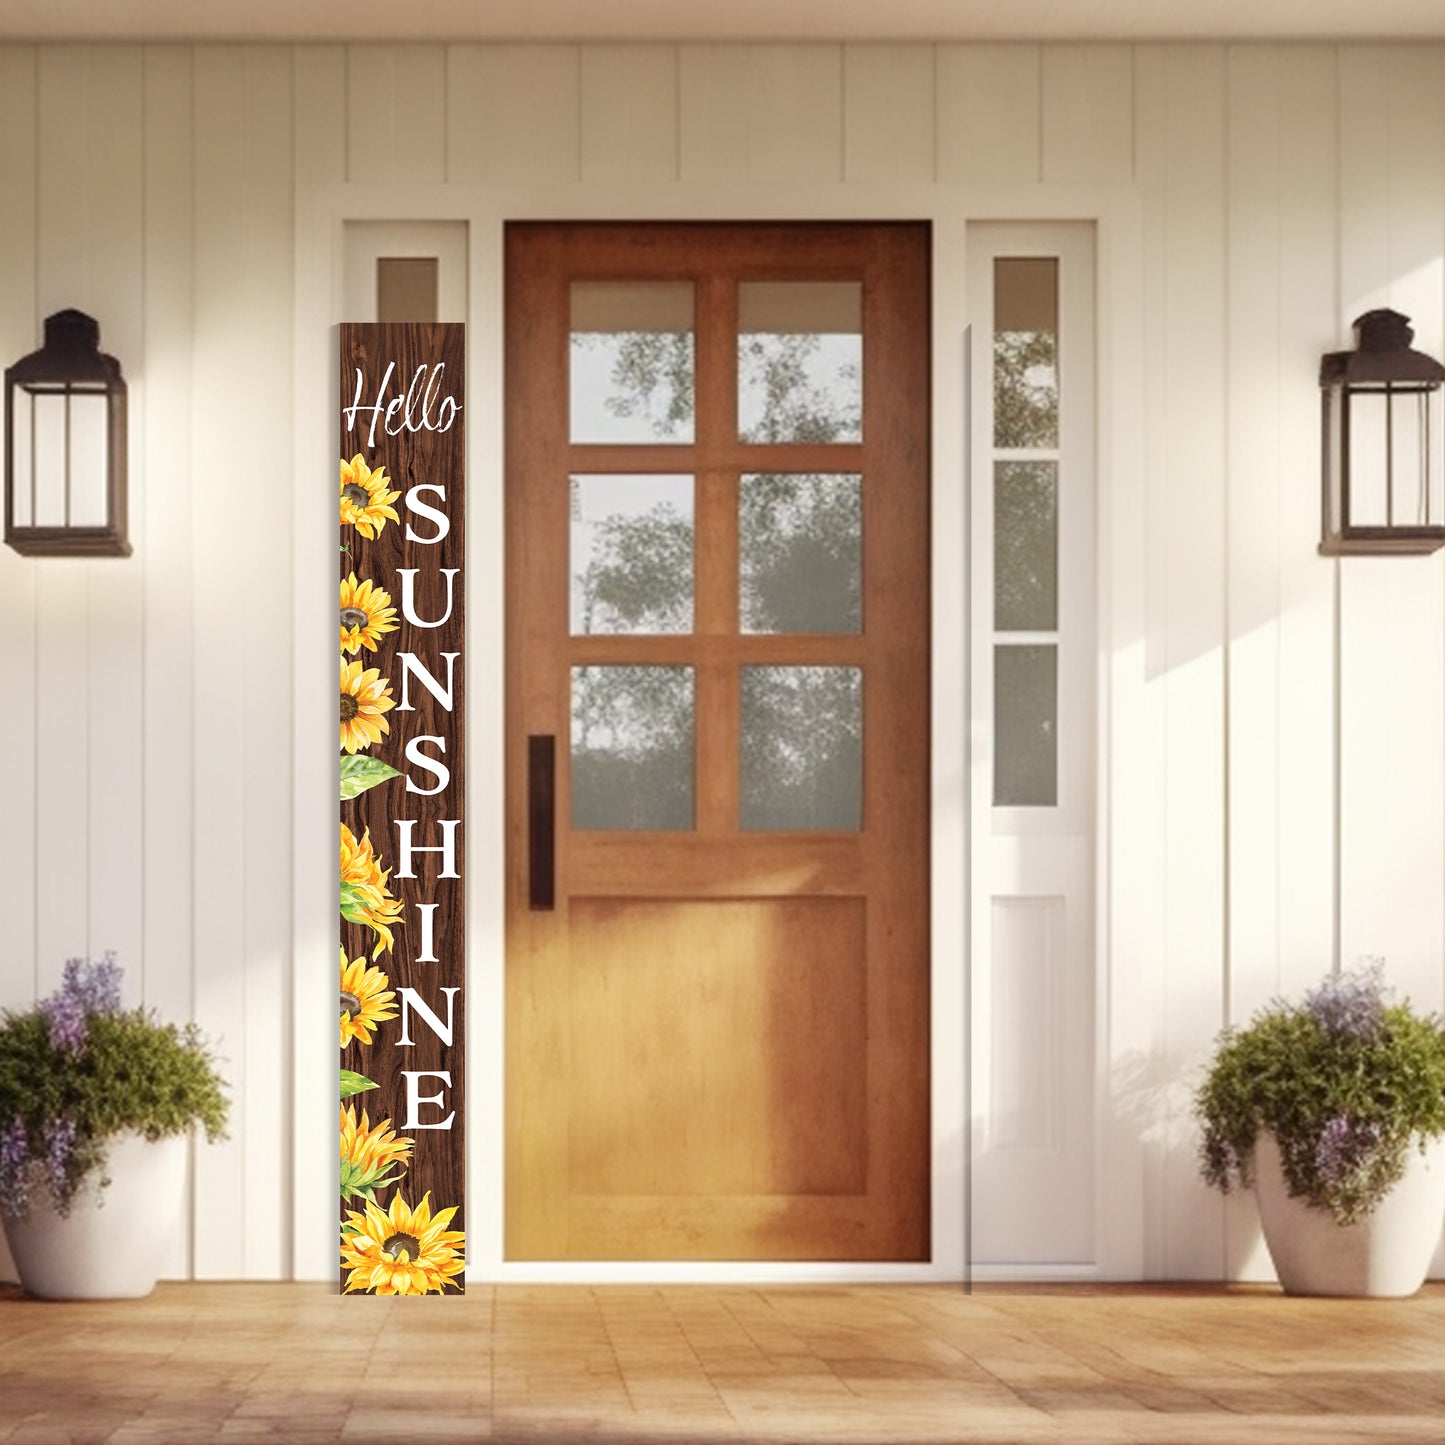 72In Sunflower Hello Sunshine Porch Sign, Charming Brown Welcome Decor For Front Door, Rustic Vertical Garden Art, Seasonal Home Decoration